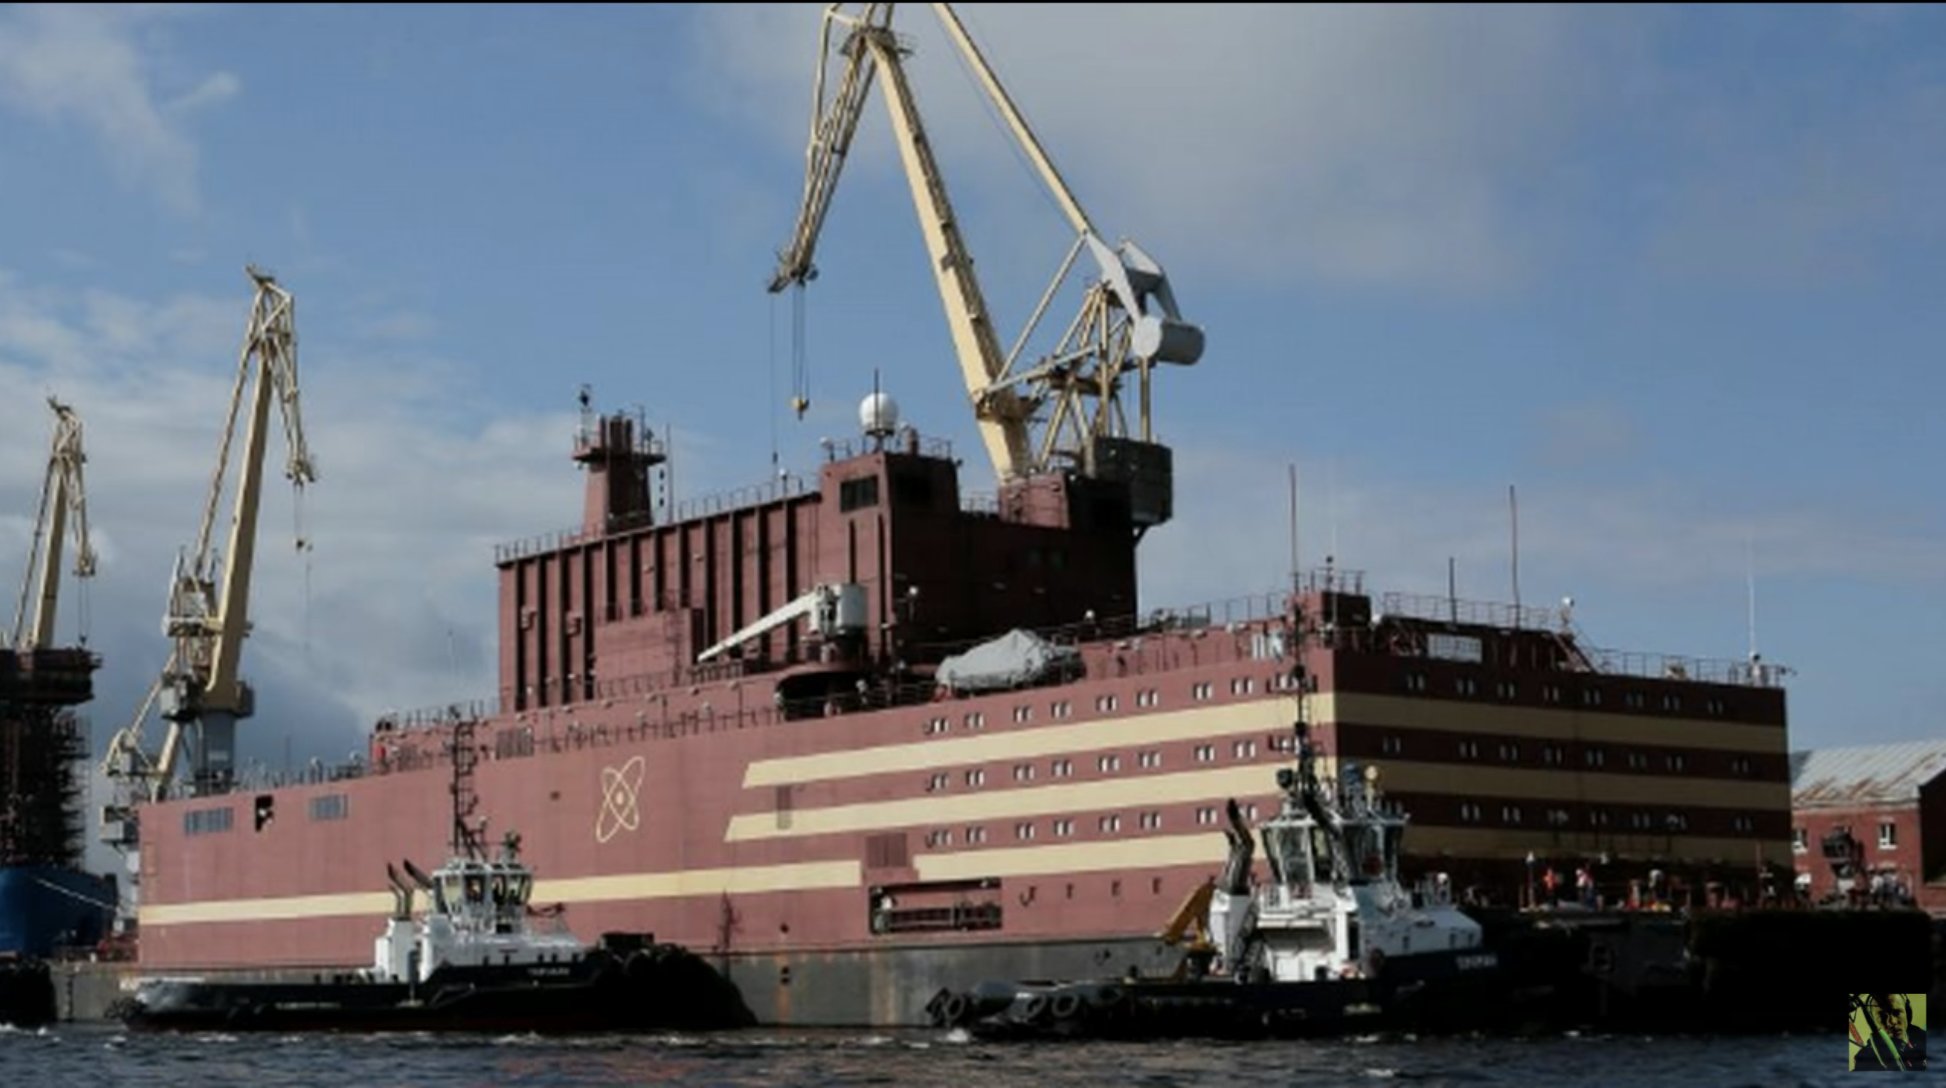 Russia’s First-Floating Nuclear Power Plant Is Headed Toward the Bering Strait